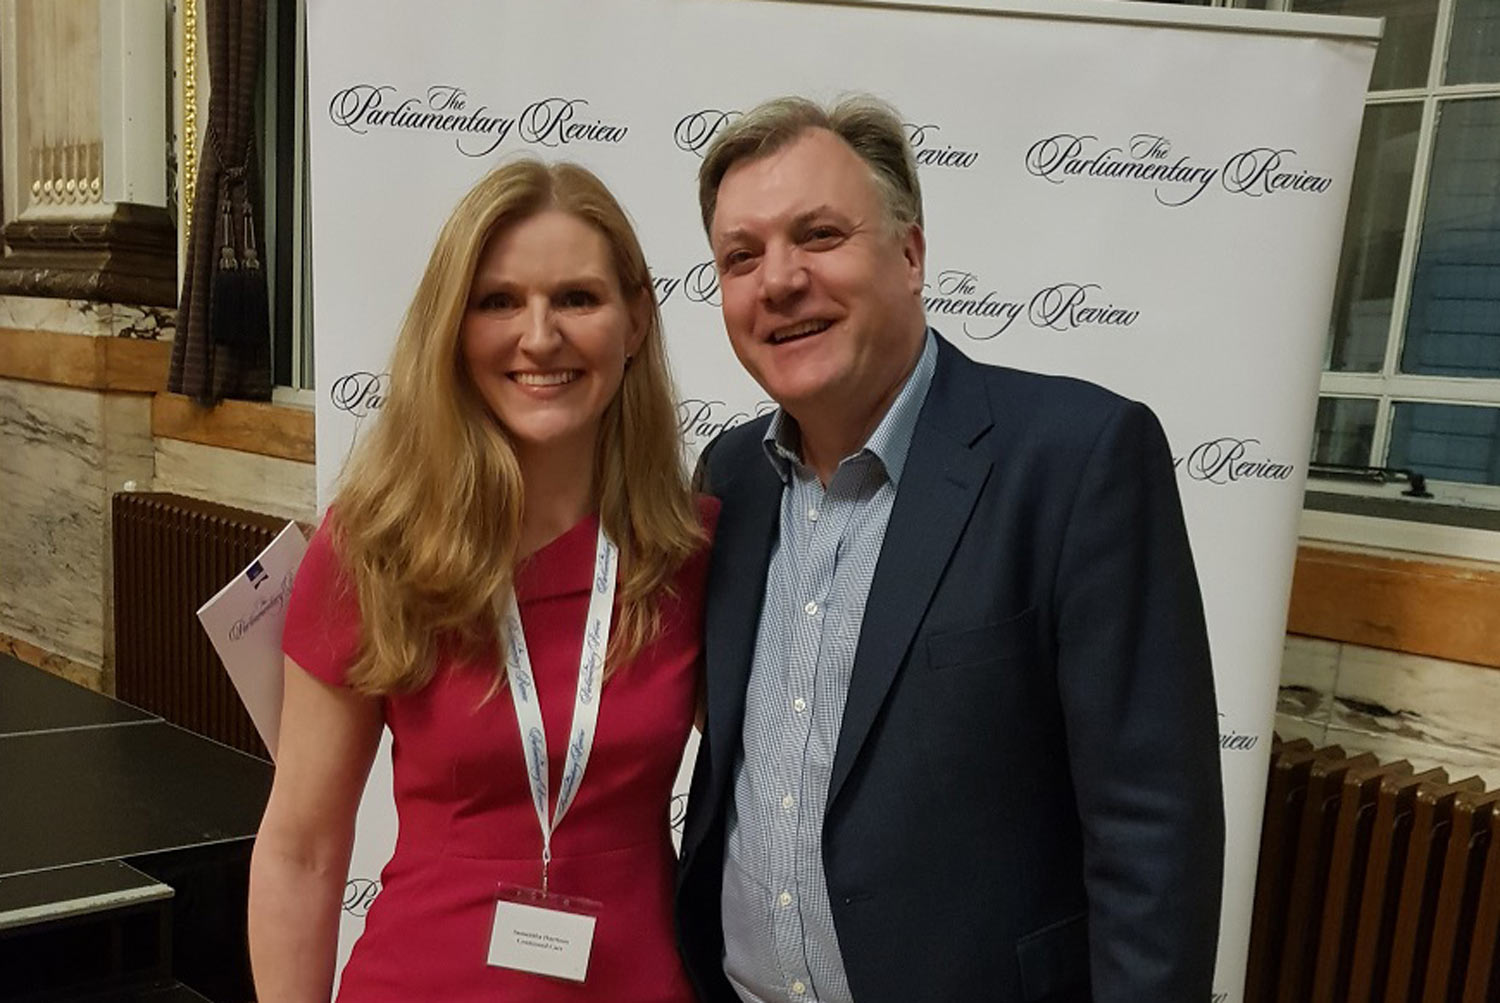 Continued Care’s director Samantha Harrison with former Labour MP Ed Balls at the gala reception for The Parliamentary Review